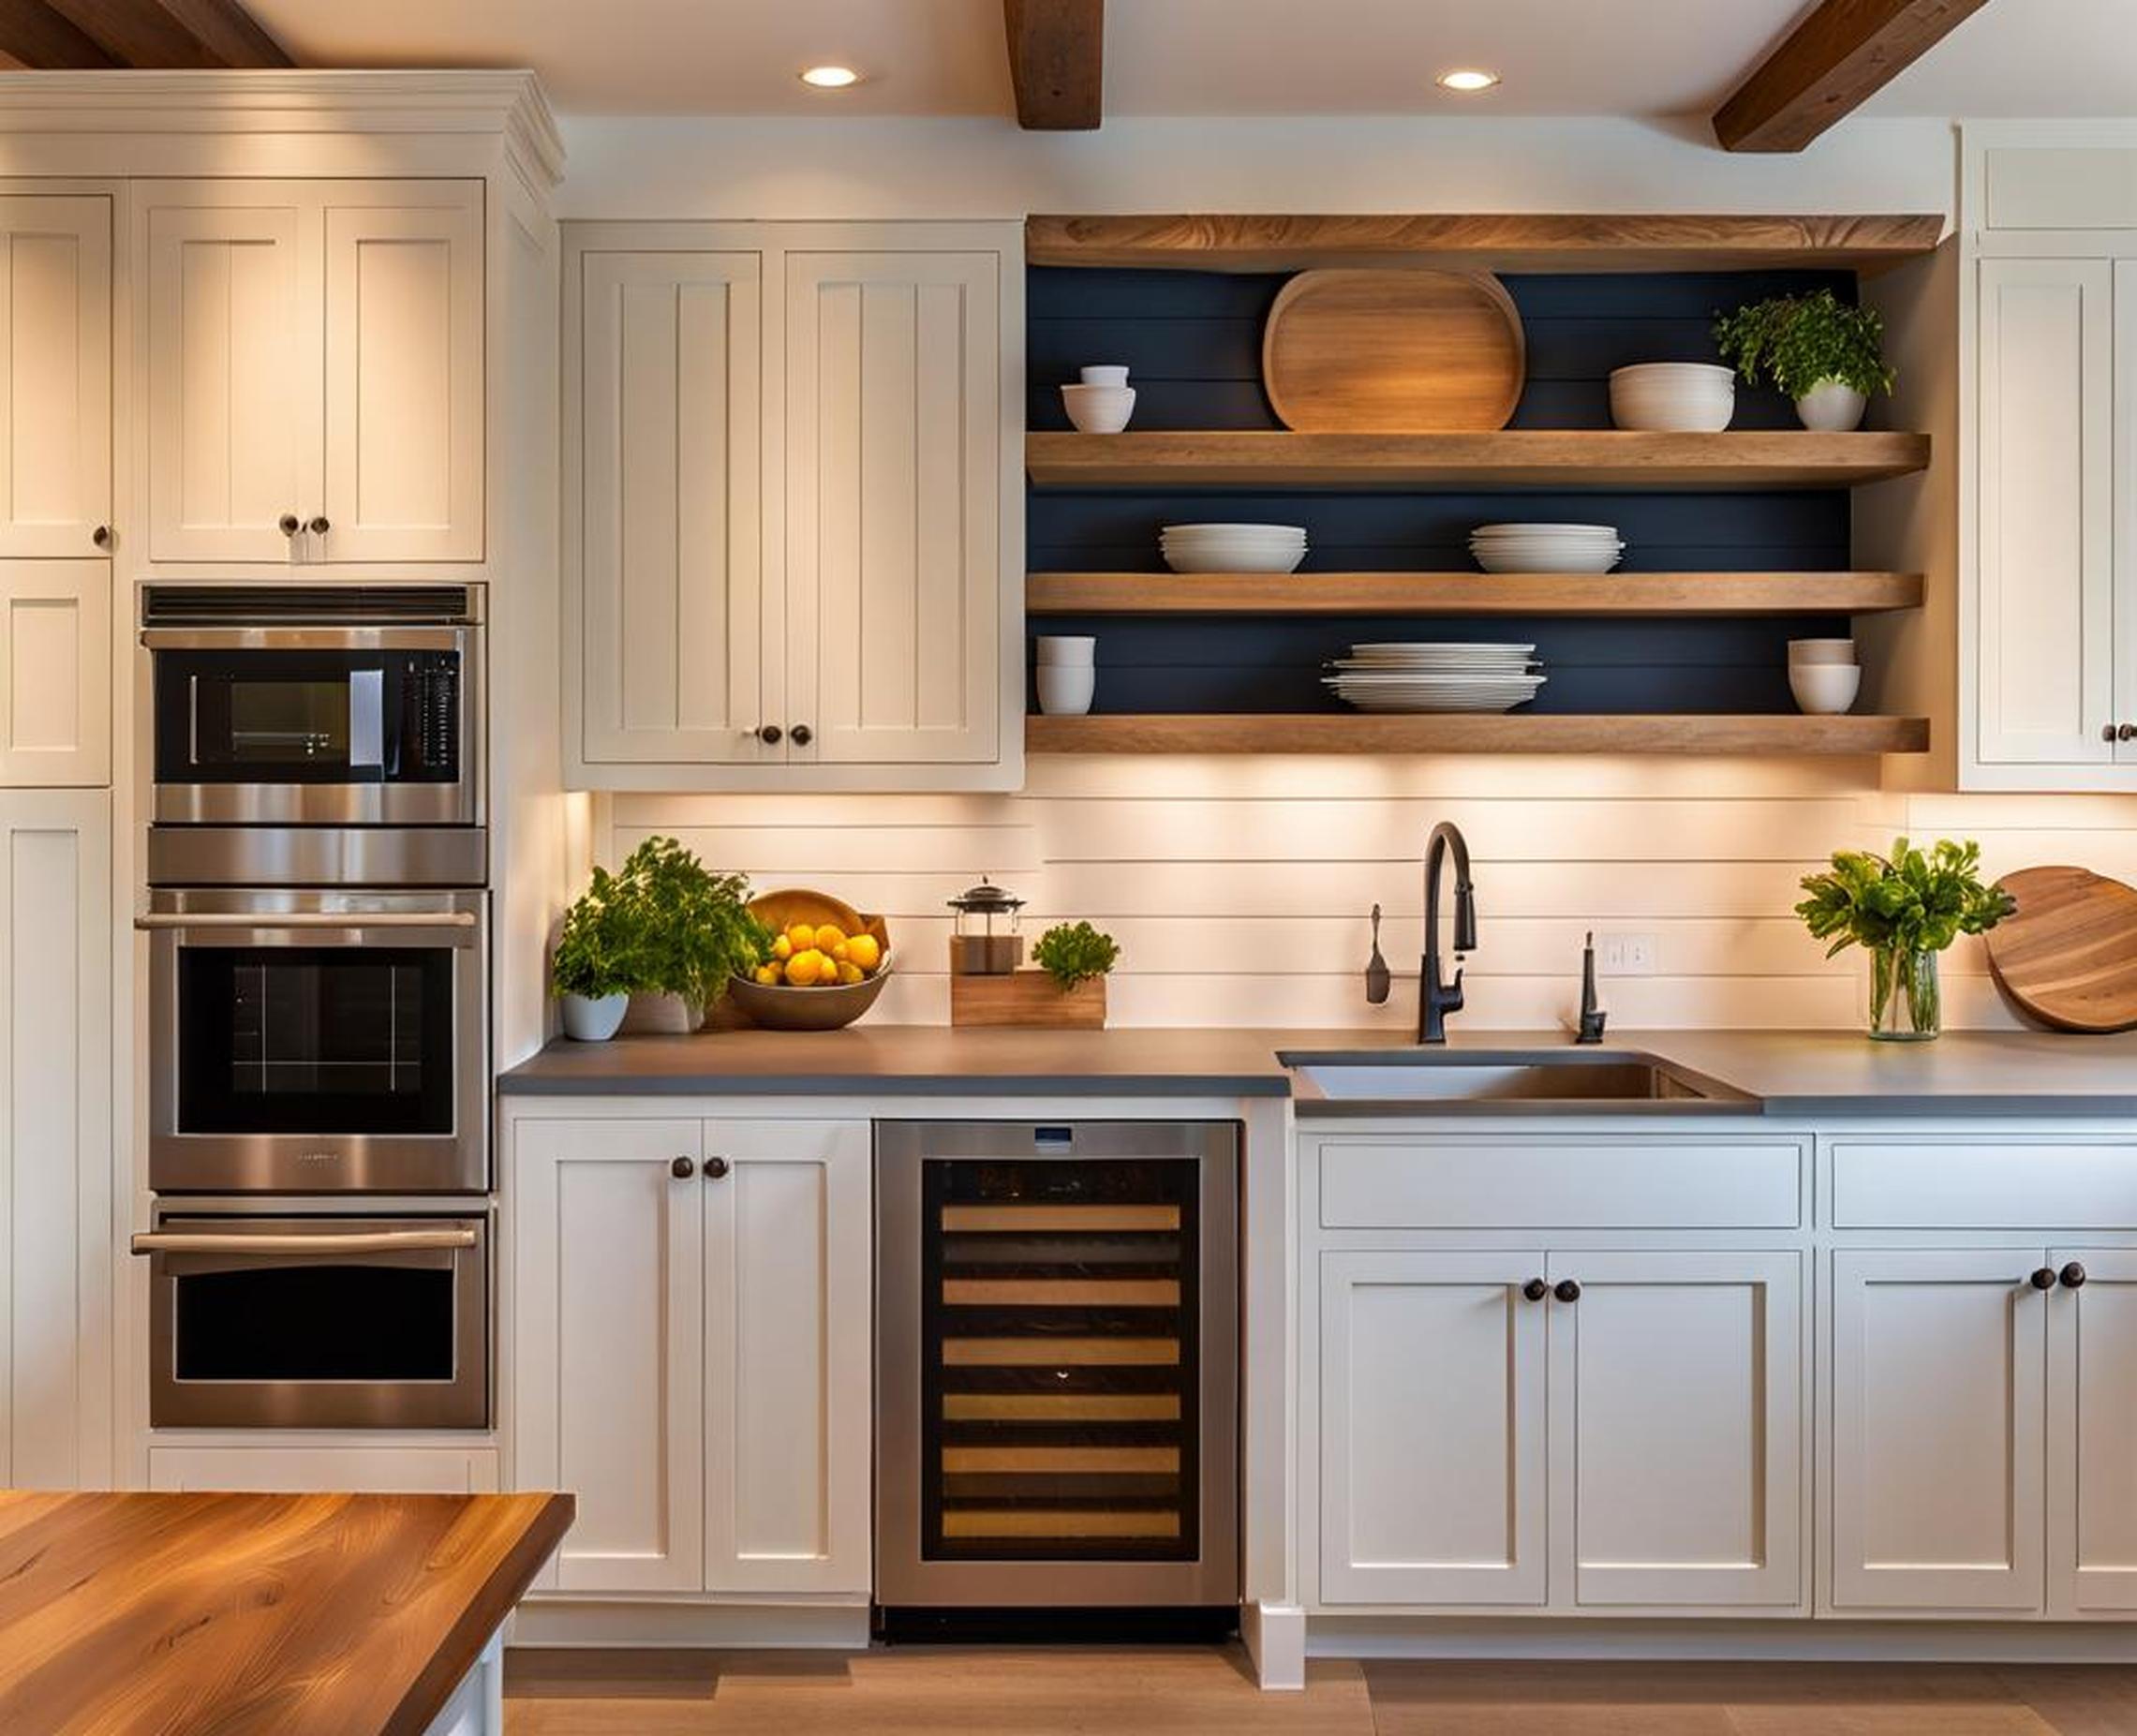 kitchens with shiplap walls